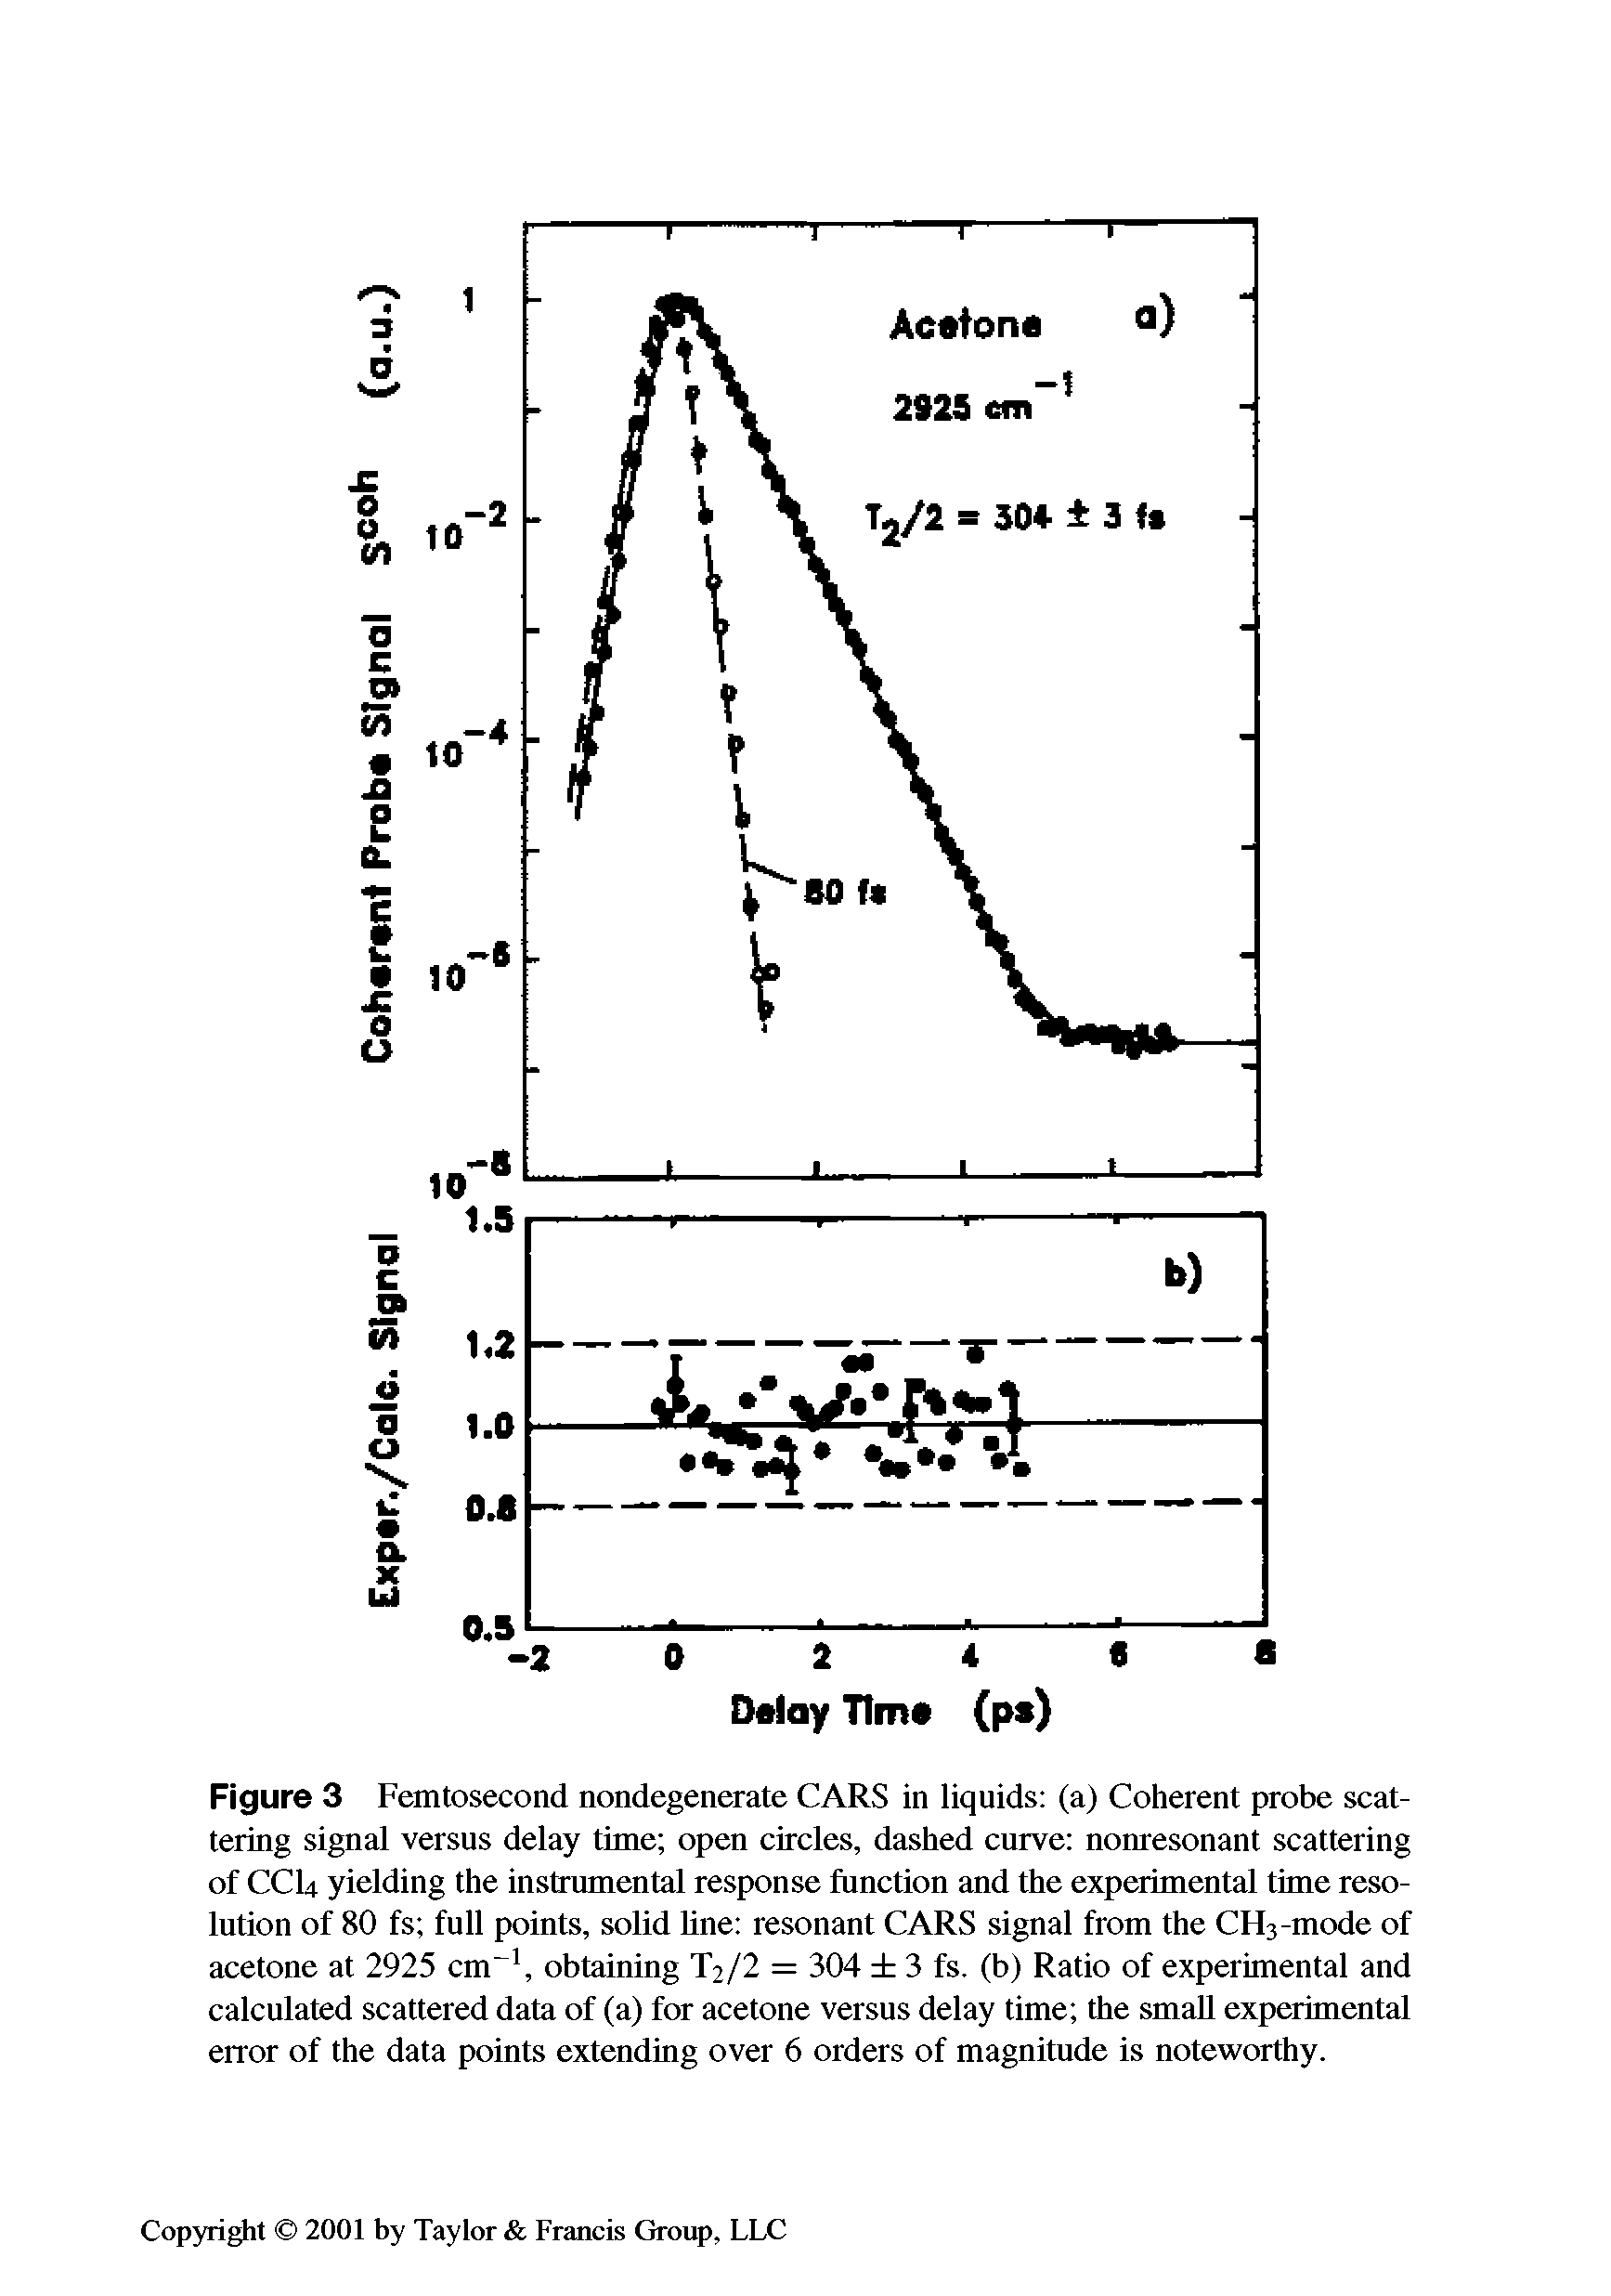 Figure 3 Femtosecond nondegenerate CARS in liquids (a) Coherent probe scattering signal versus delay time open circles, dashed curve nonresonant scattering of CCU yielding the instrumental response function and the experimental time resolution of 80 fs full points, solid line resonant CARS signal from the CH3-mode of acetone at 2925 cue1, obtaining T2/2 = 304 3 fs. (b) Ratio of experimental and calculated scattered data of (a) for acetone versus delay time the small experimental error of the data points extending over 6 orders of magnitude is noteworthy.